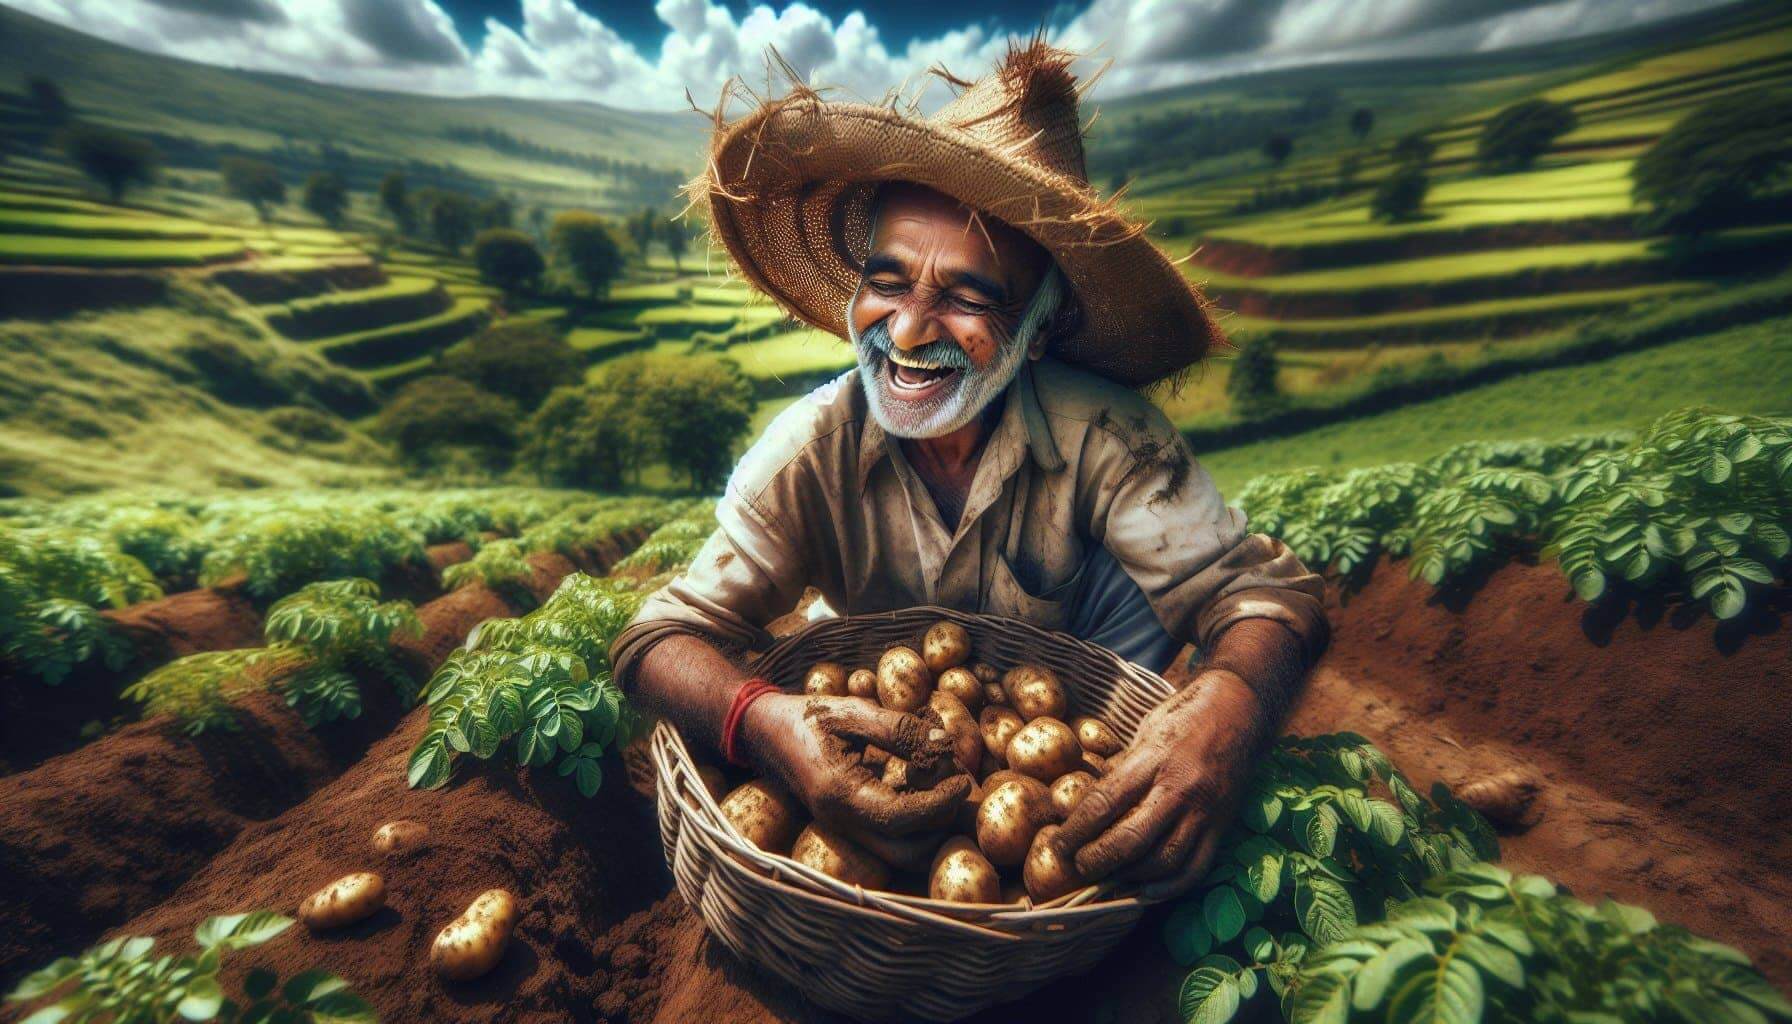 A man in a hat holds a basket of potatoes, showcasing a traditional harvest scene.